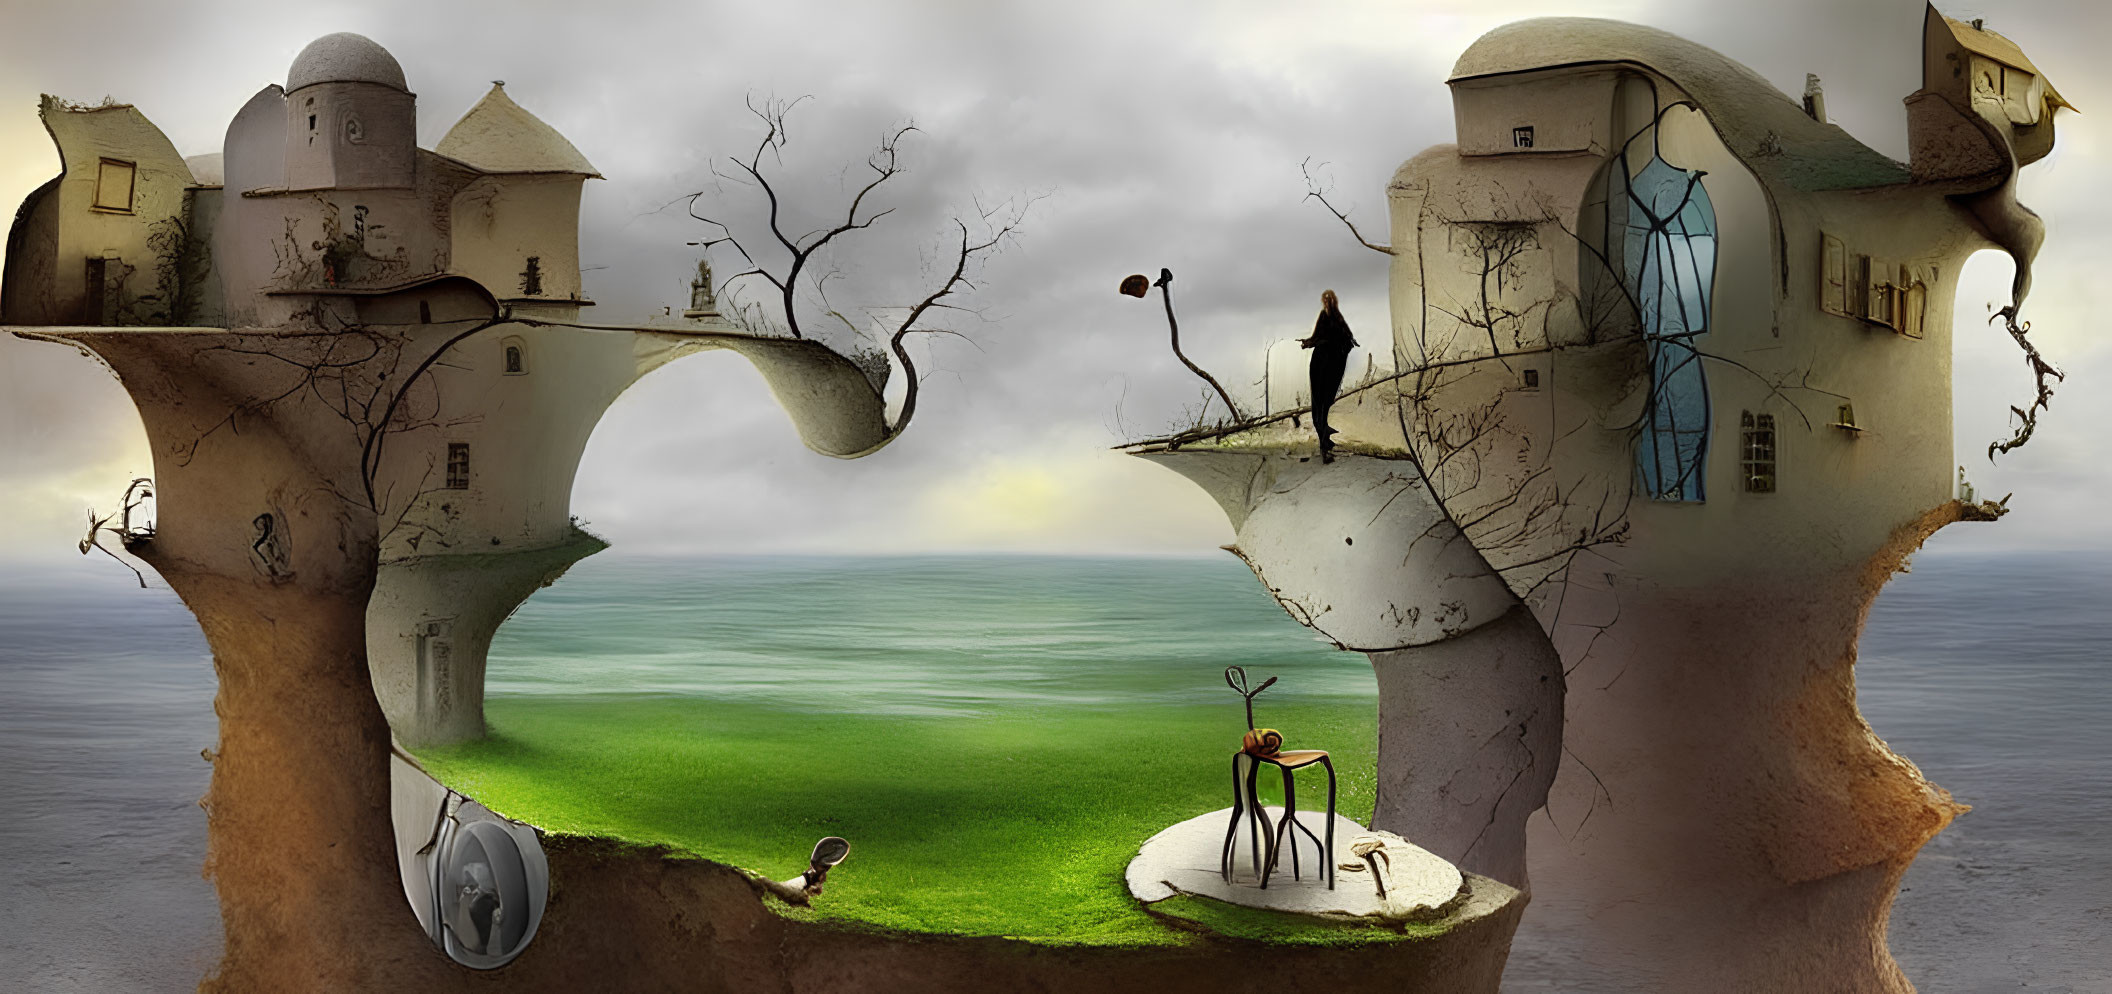 Surreal landscape with floating islands and whimsical structures